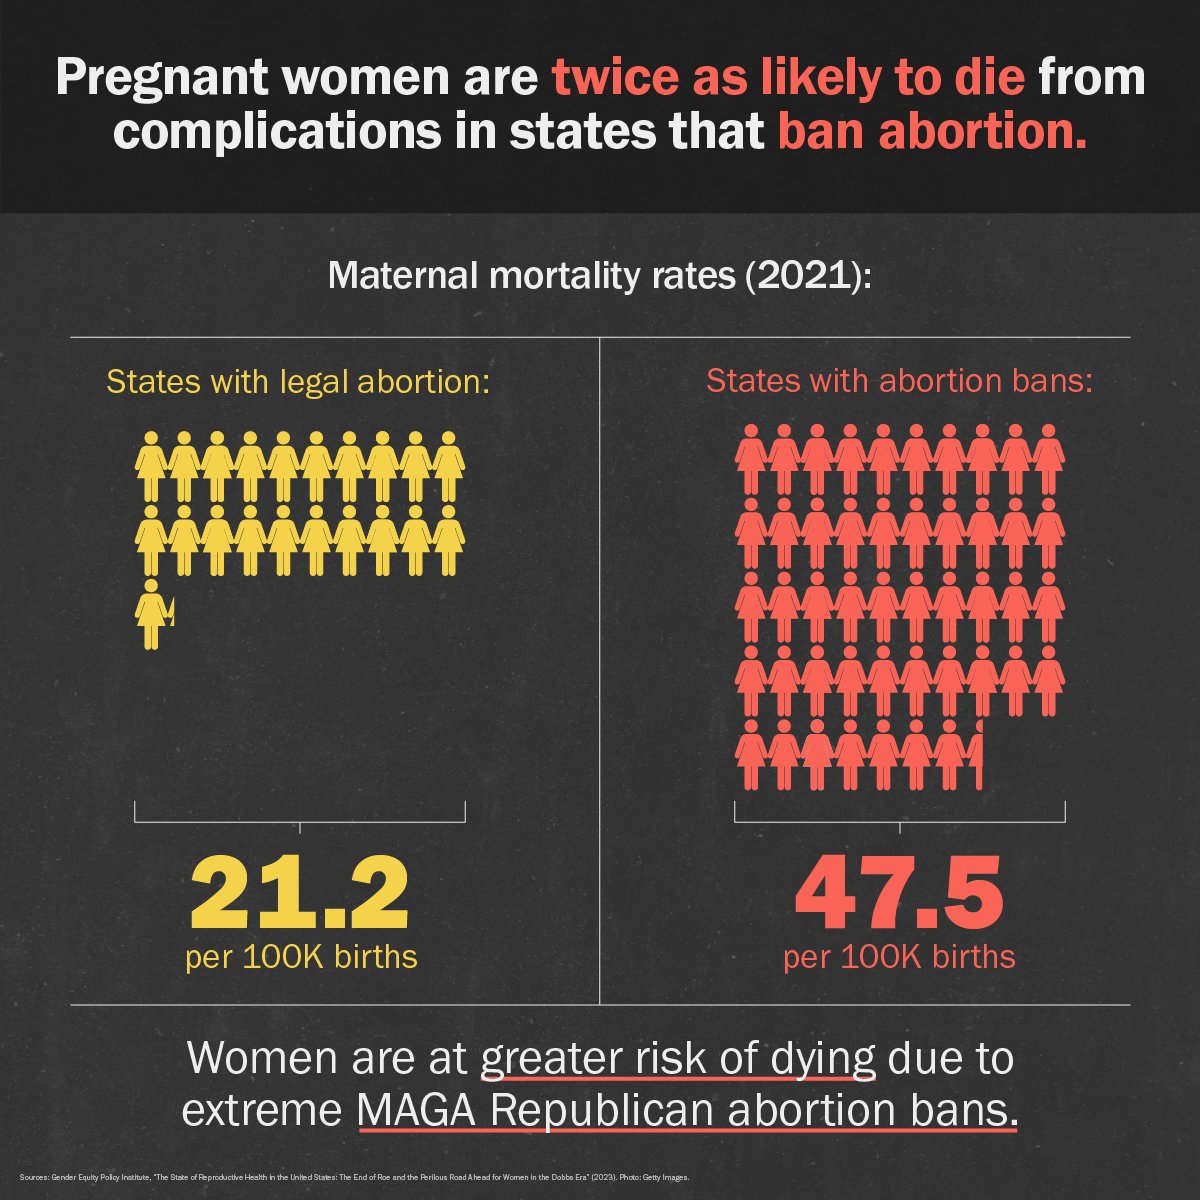 Women are at greater risk of dying due to extreme MAGA Republican abortion bans. Pass it on.